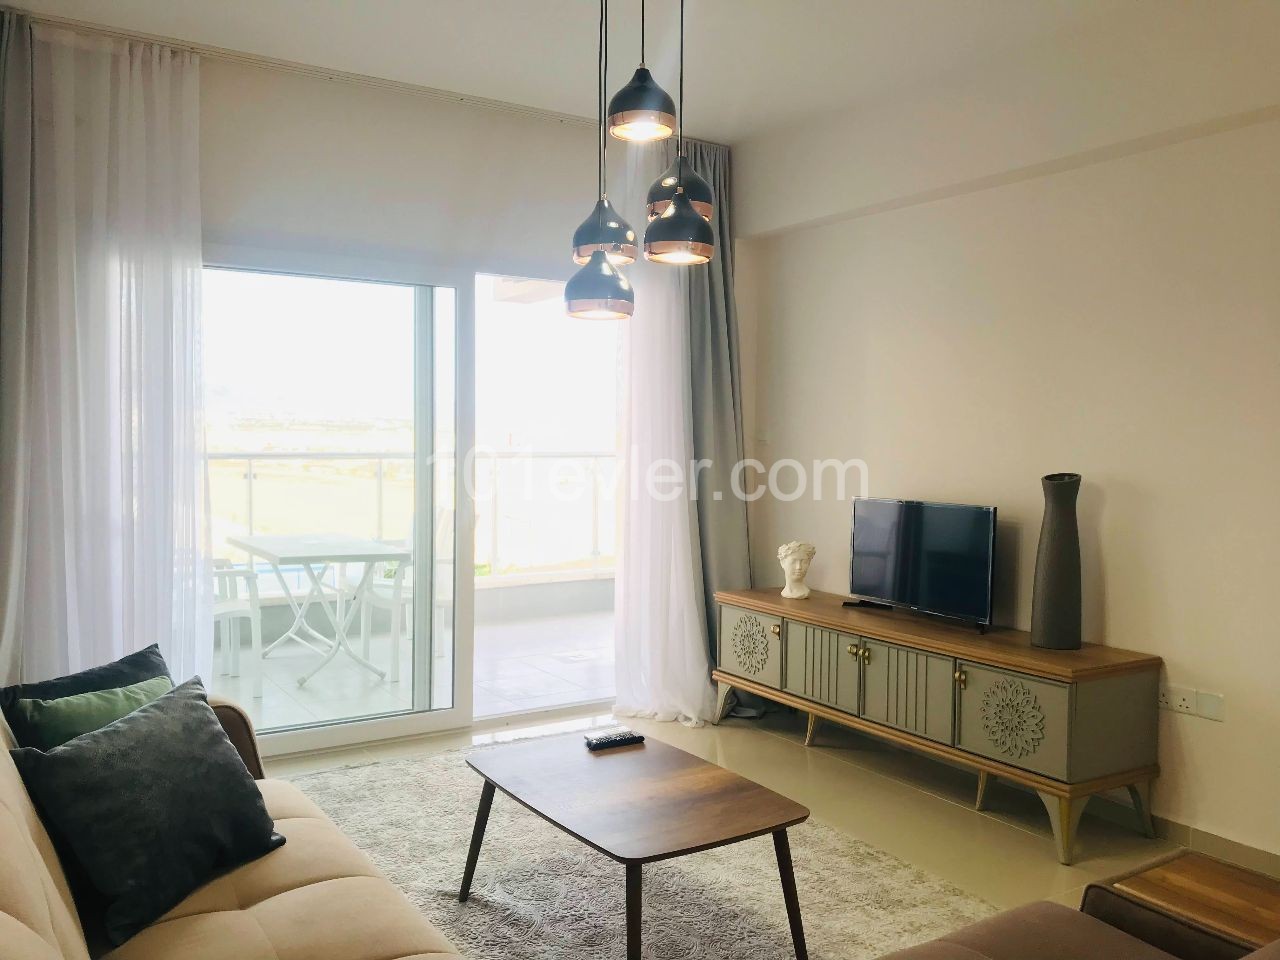 1+1 Flat for Rent in Long Beach, Iskele